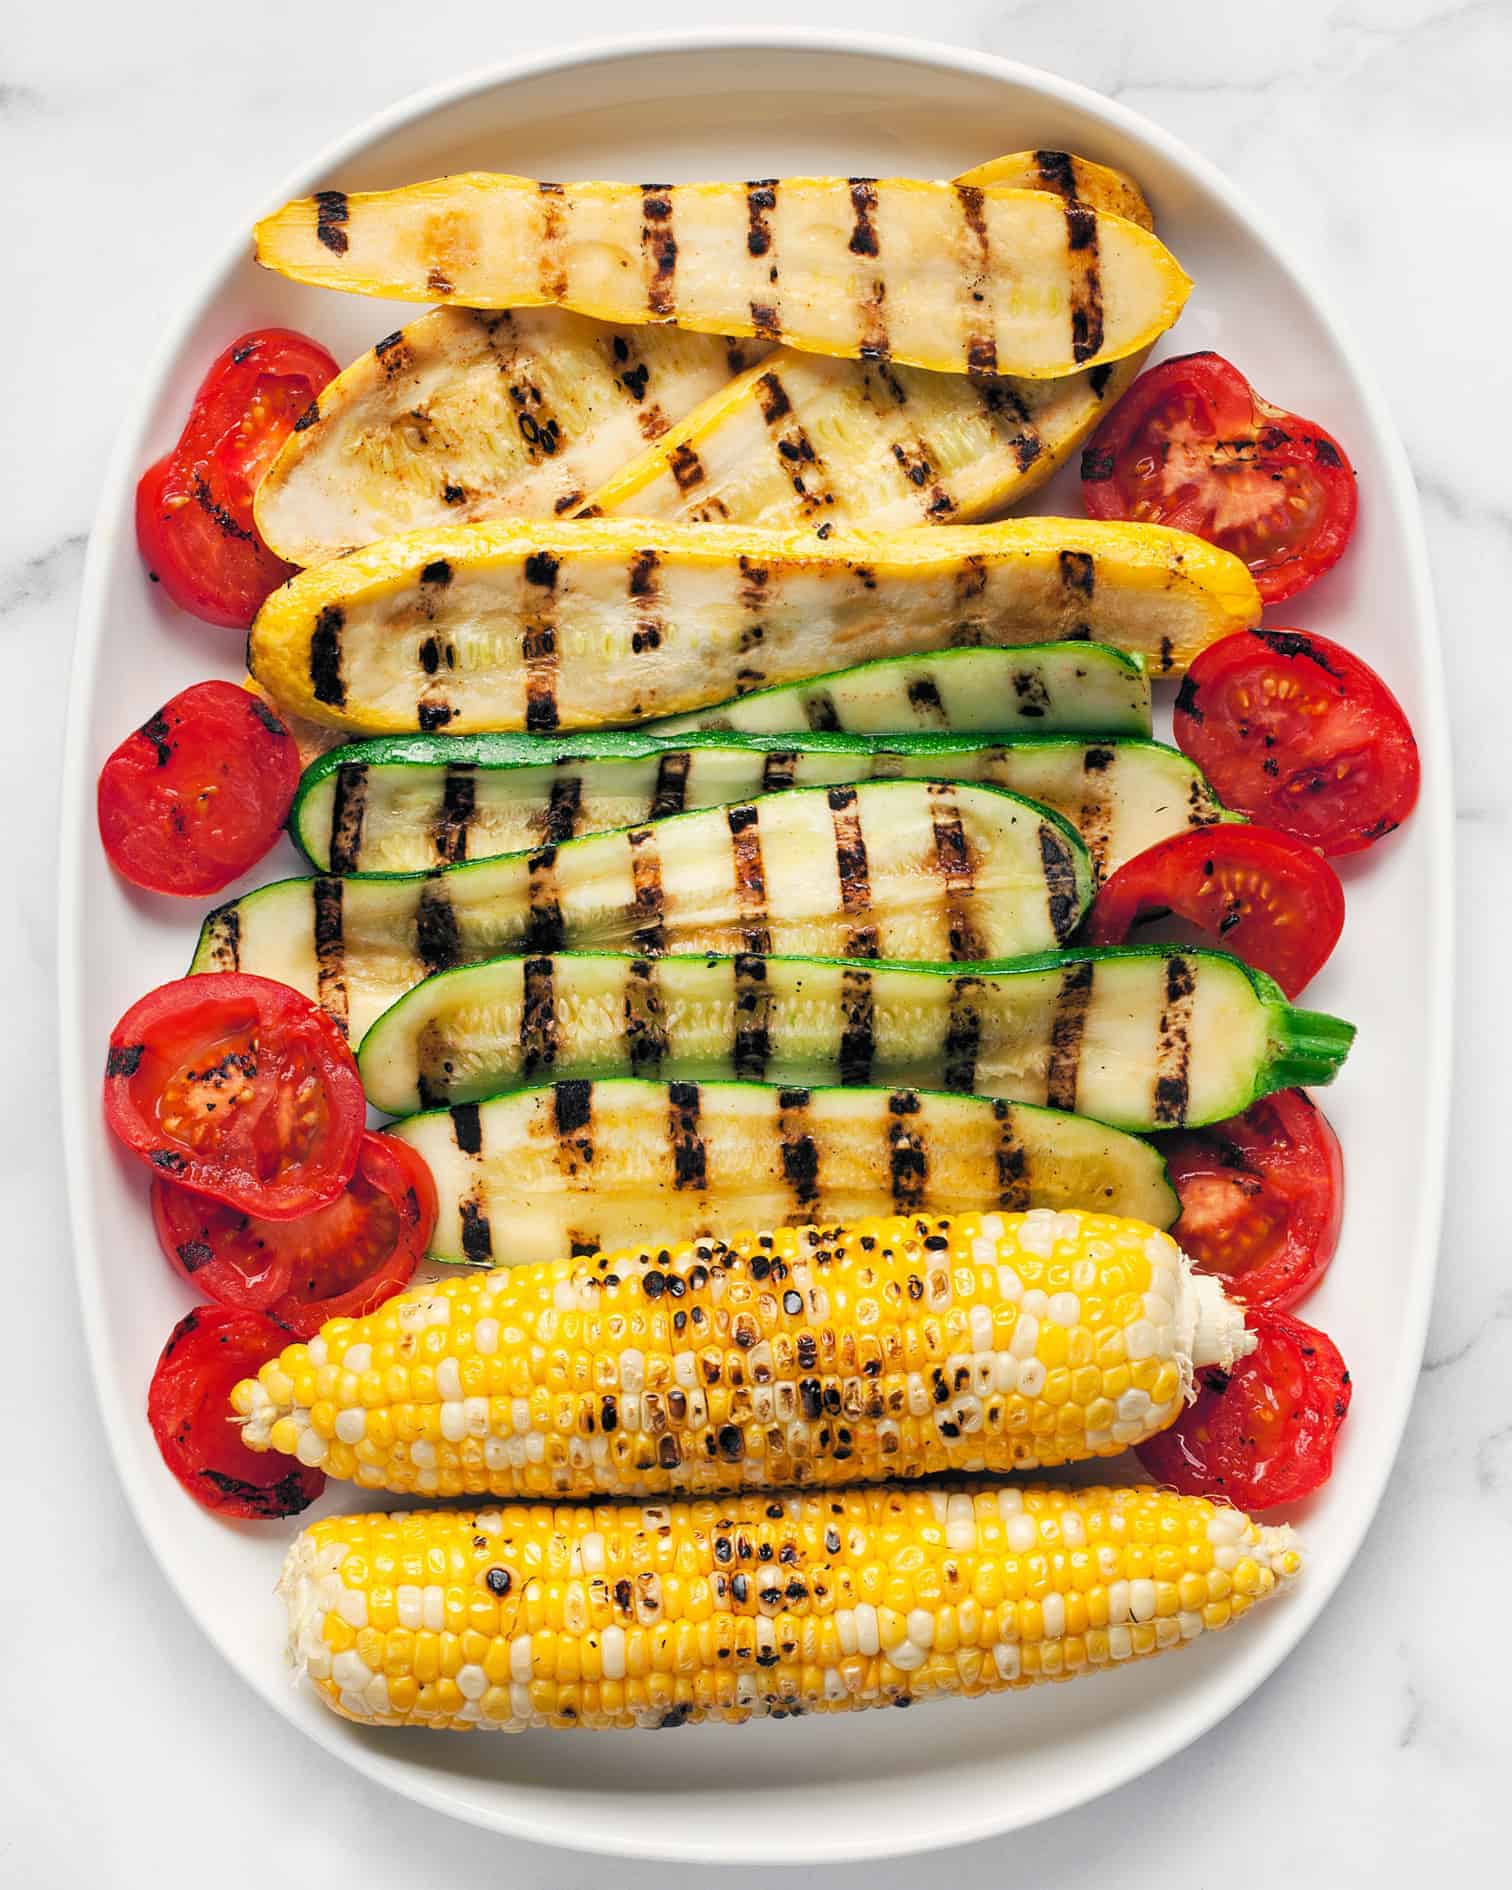 https://www.lastingredient.com/wp-content/uploads/2019/06/how-to-grill-vegetables-without-a-grill1.jpg